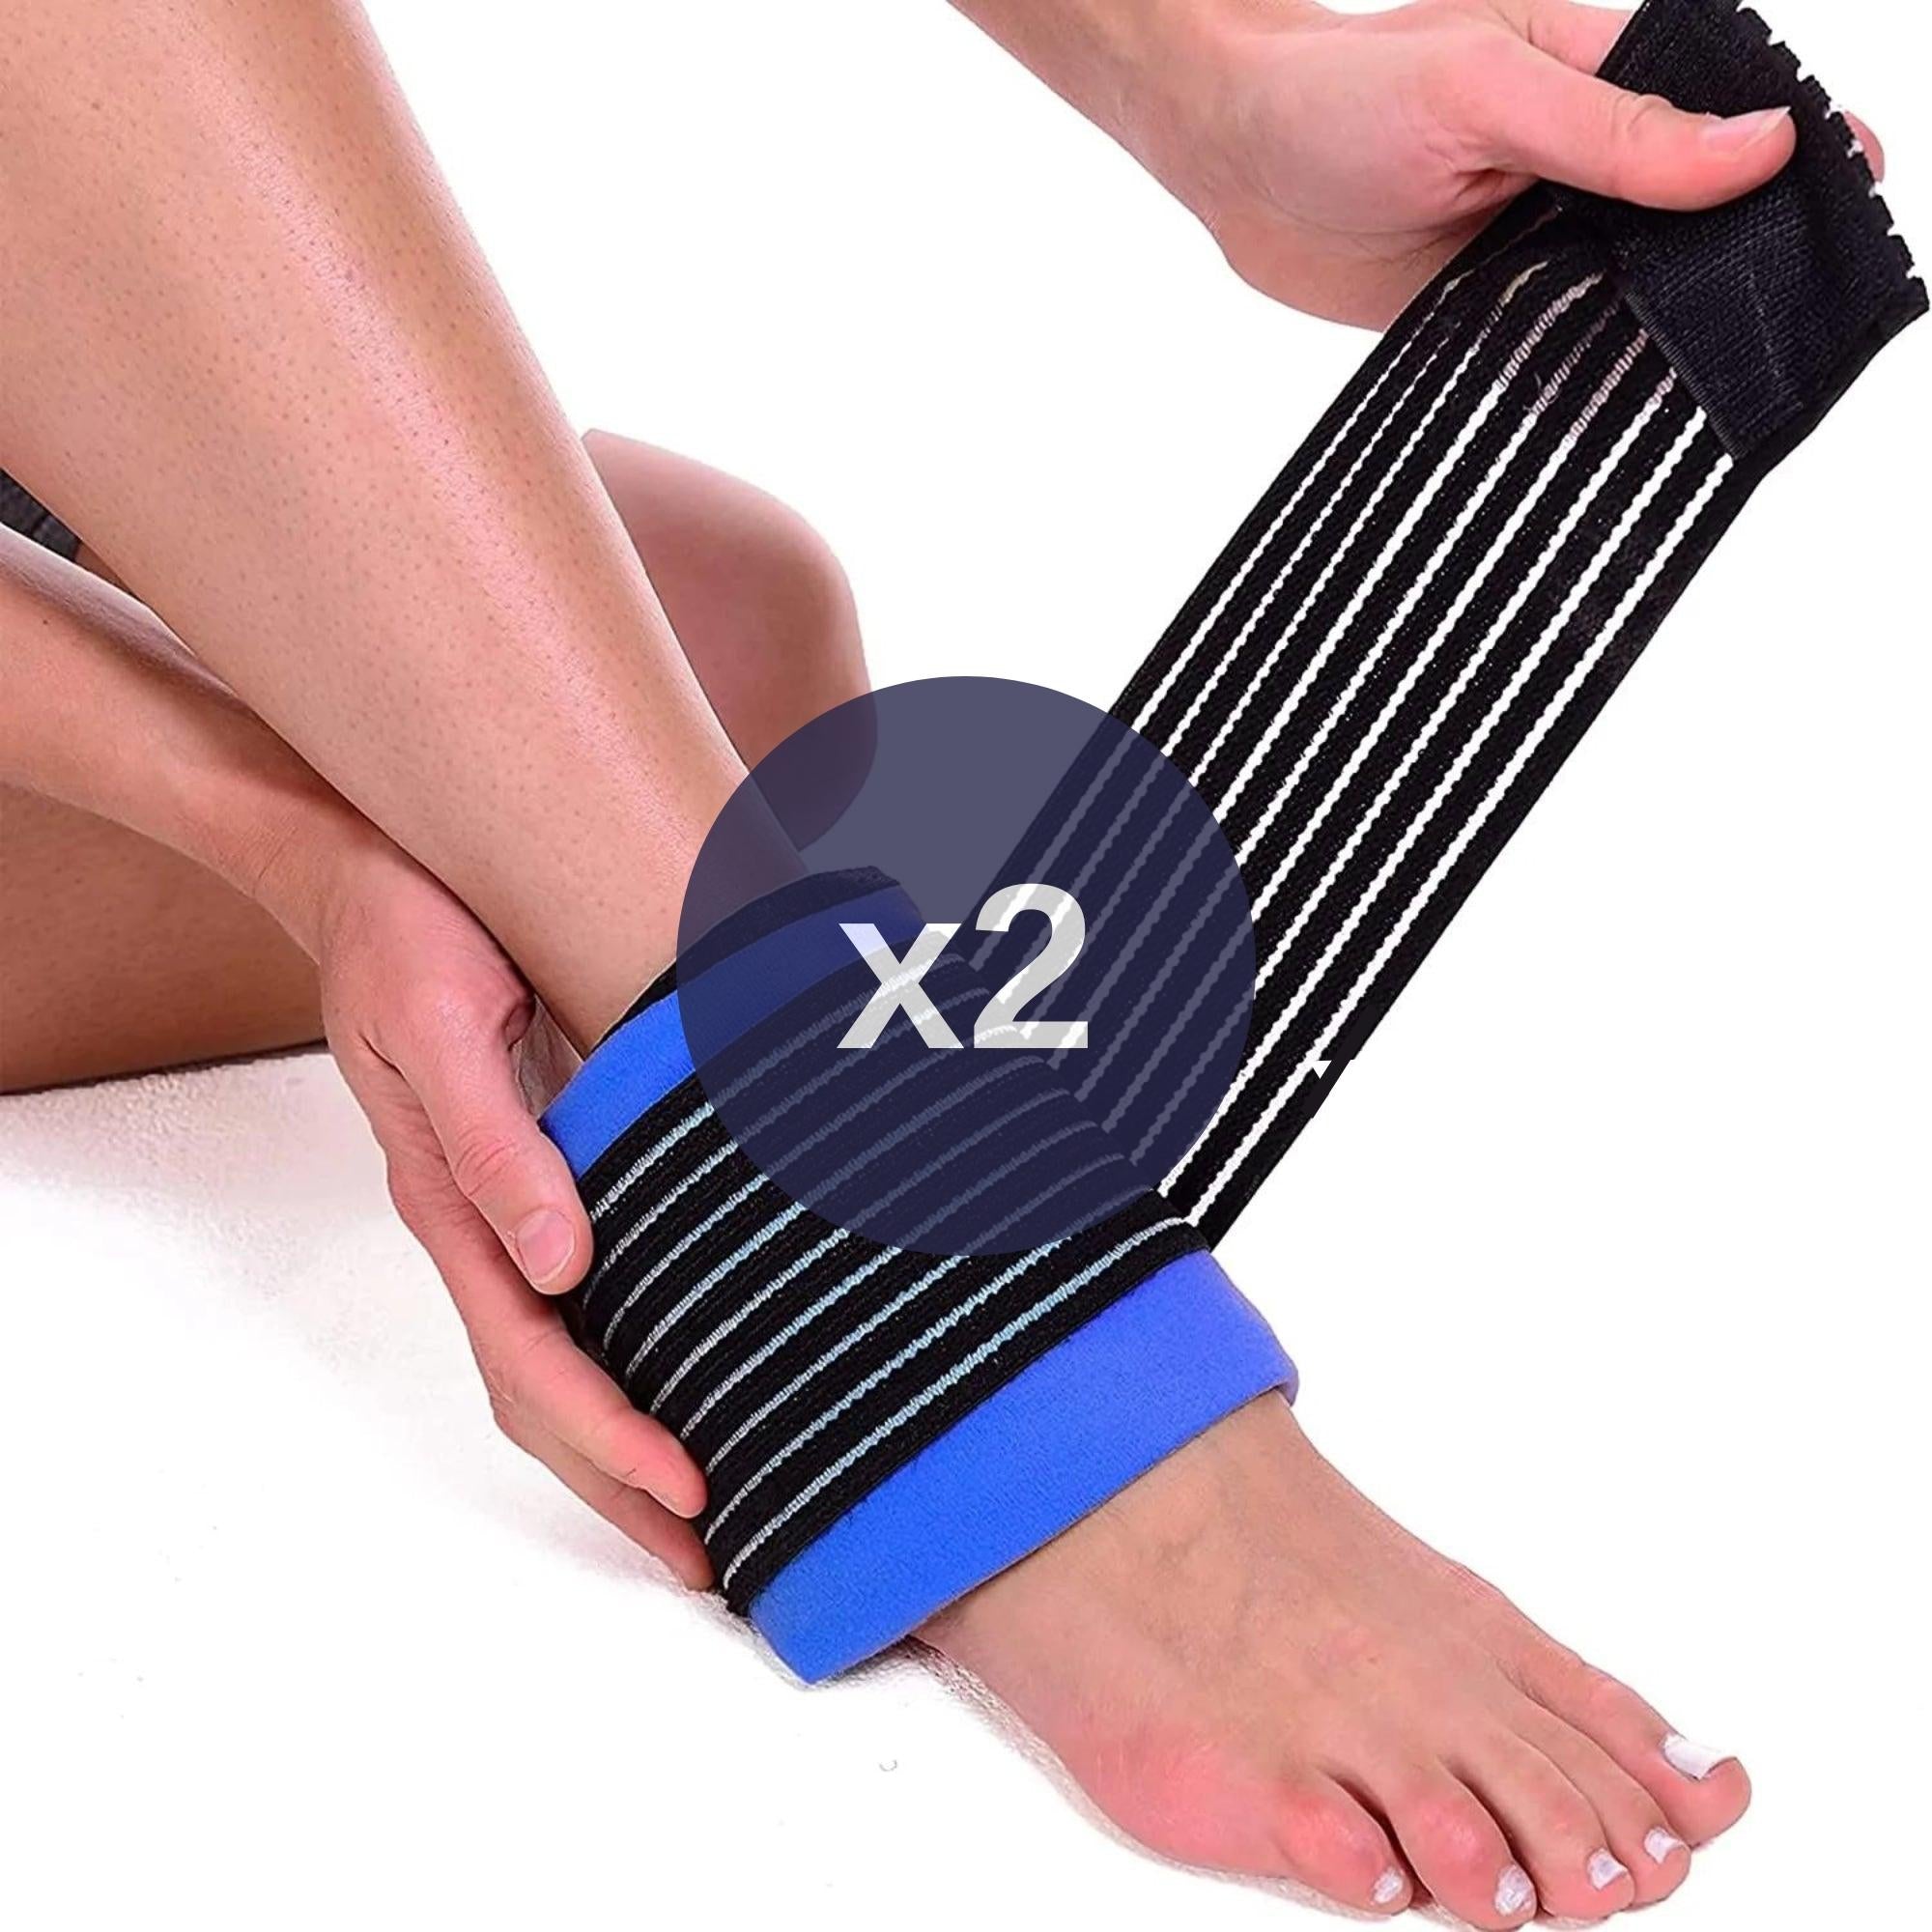 GPD Ankle Compress Wrap for Hot Cold Packs (Sold Separately) - 2 Pack